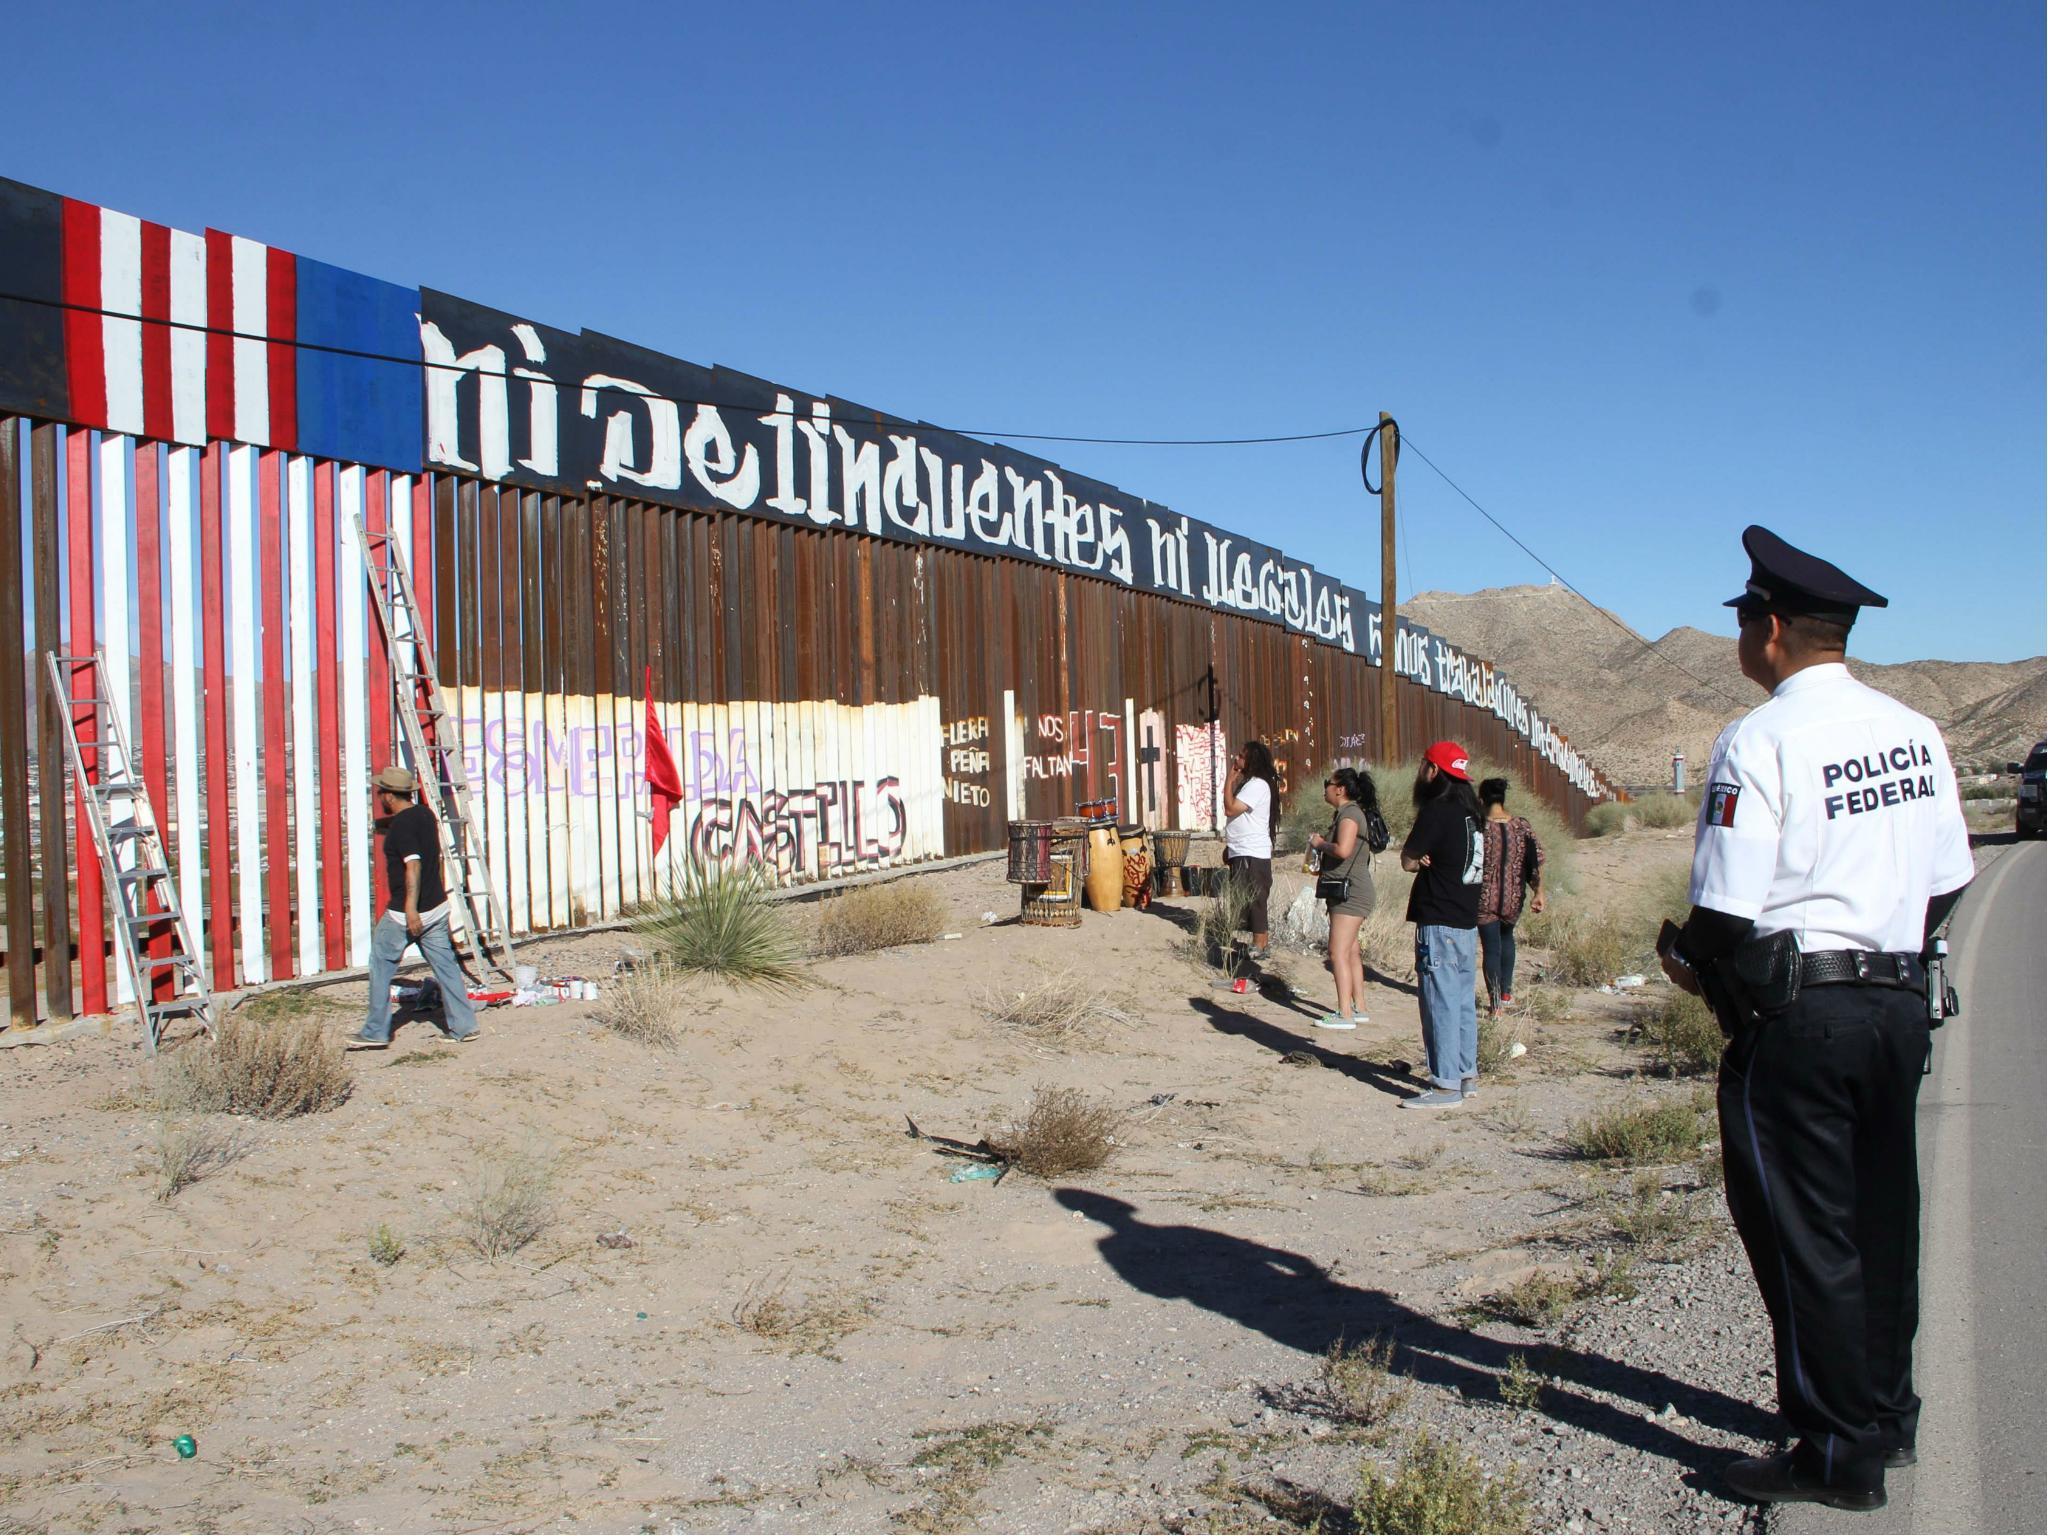 A Mexican policeman observes activists painting the border wall between the cities of Ciudad Juarez and Sunland Park